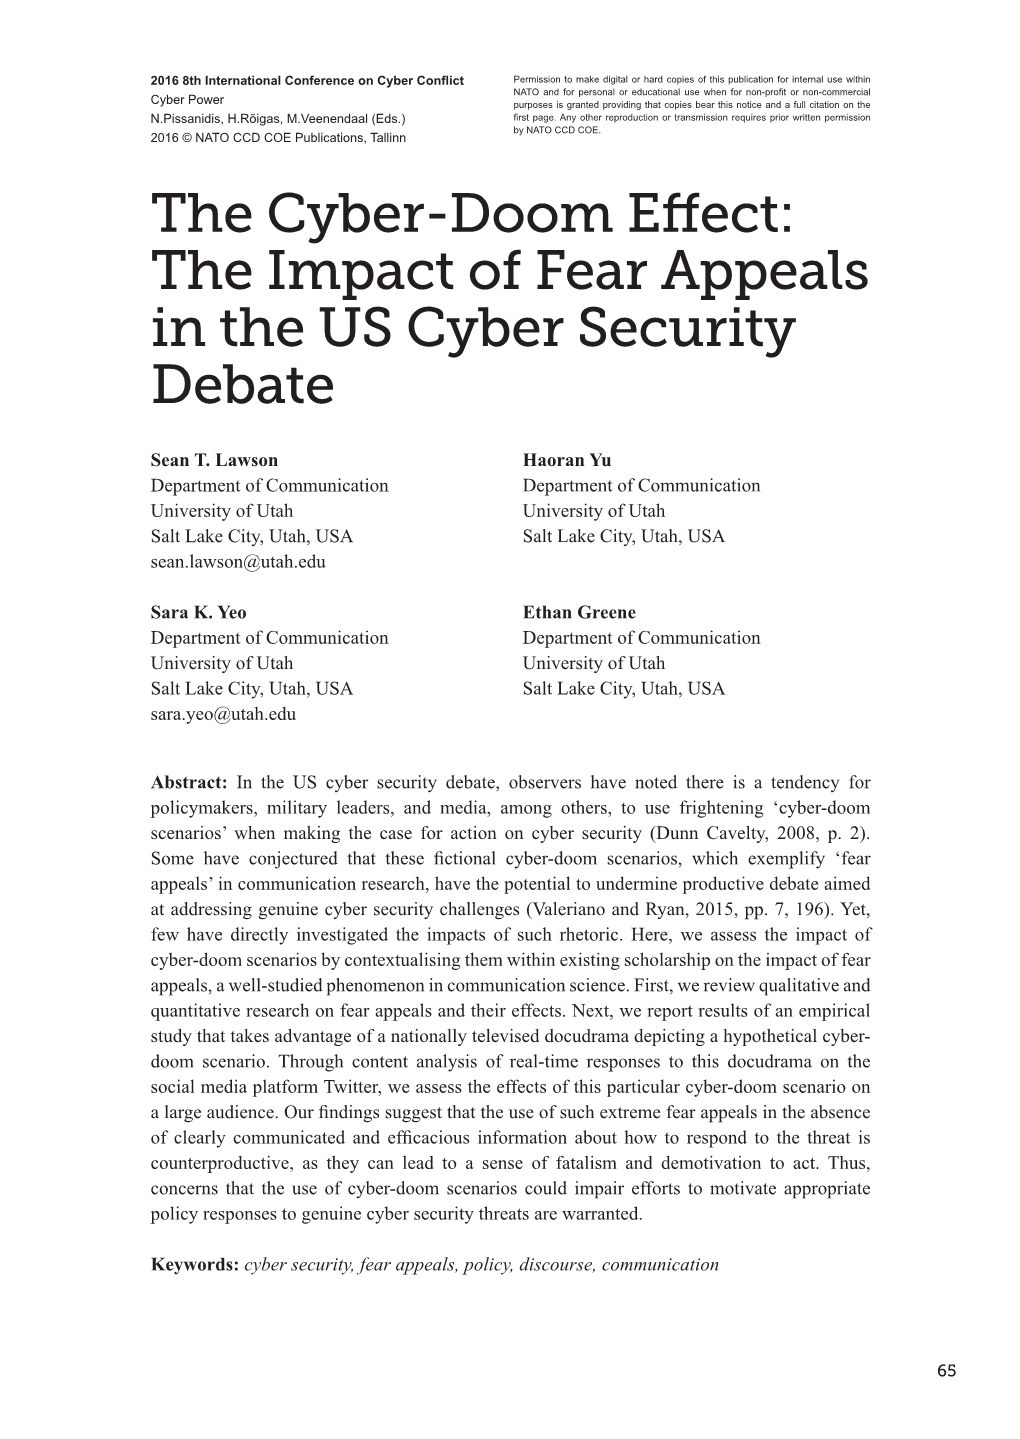 The Cyber-Doom Effect: the Impact of Fear Appeals in the US Cyber Security Debate